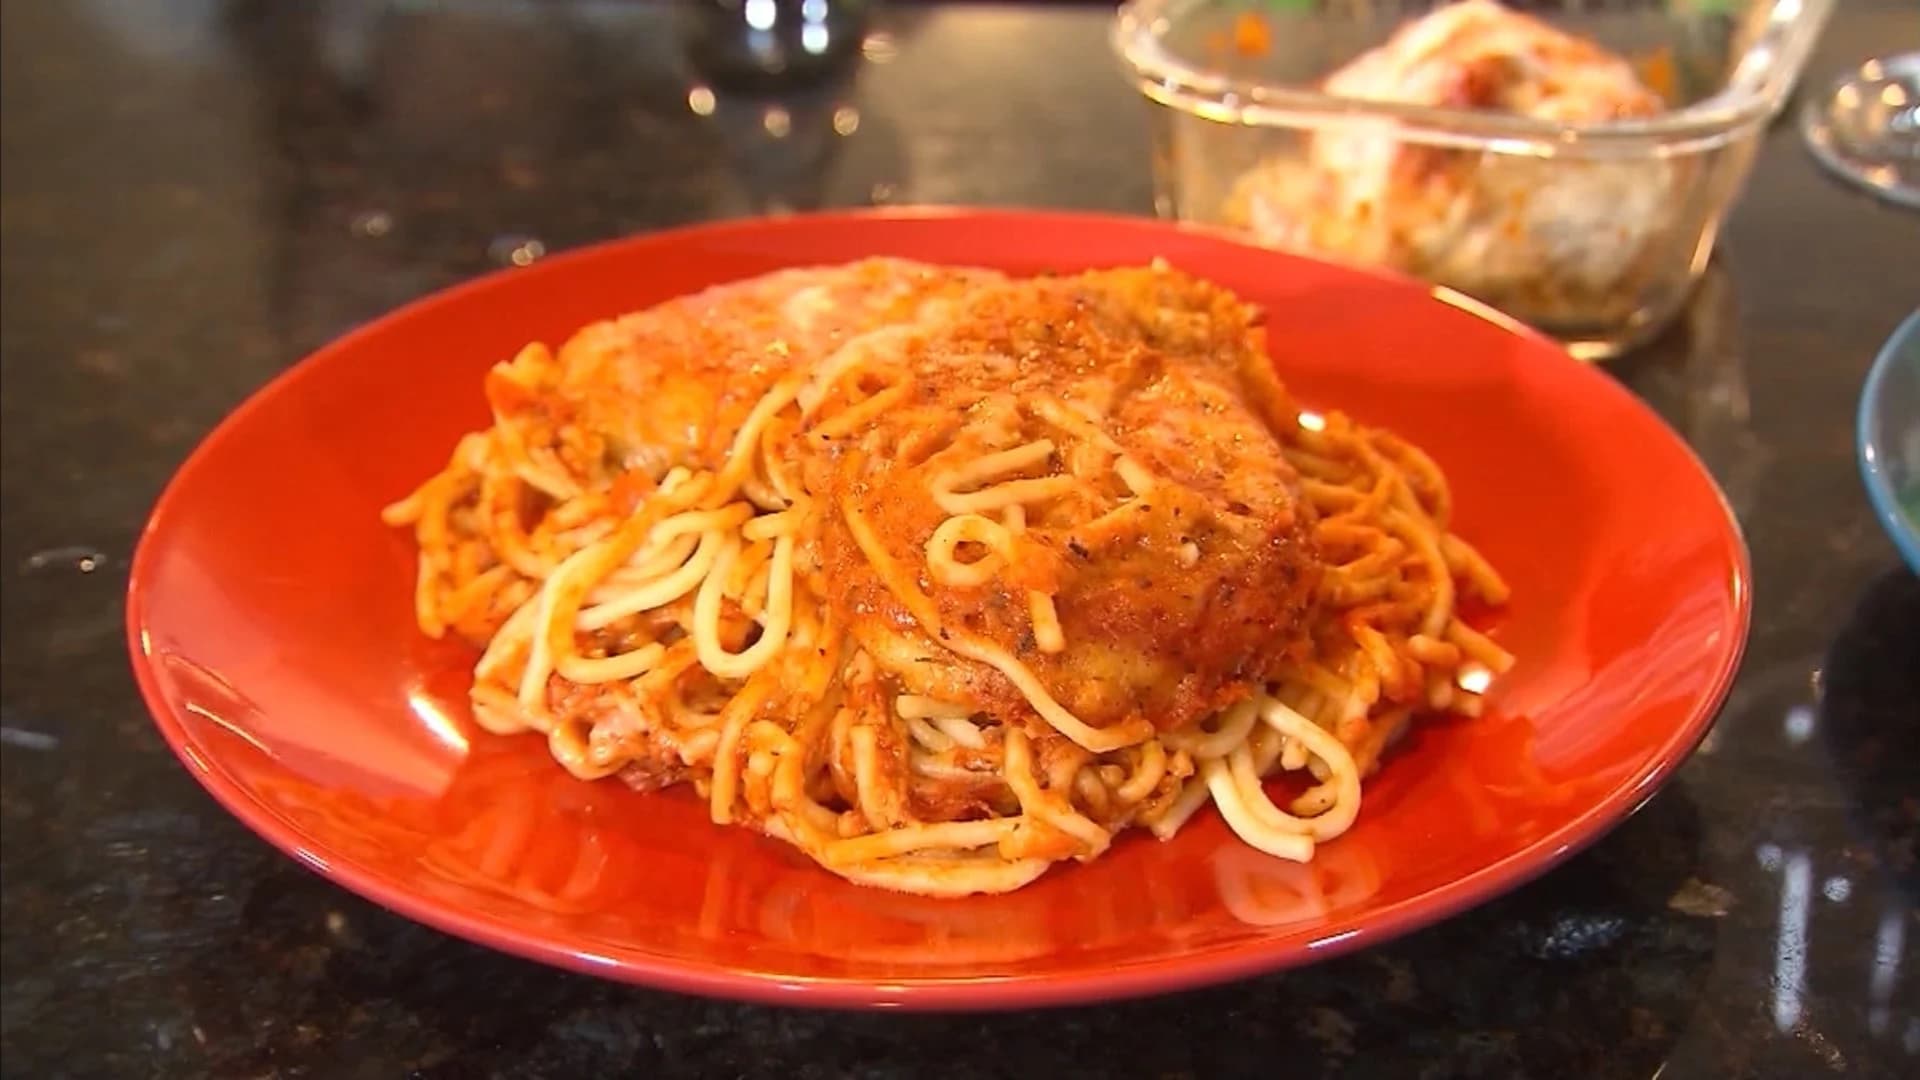 Time to indulge on National Pasta Day